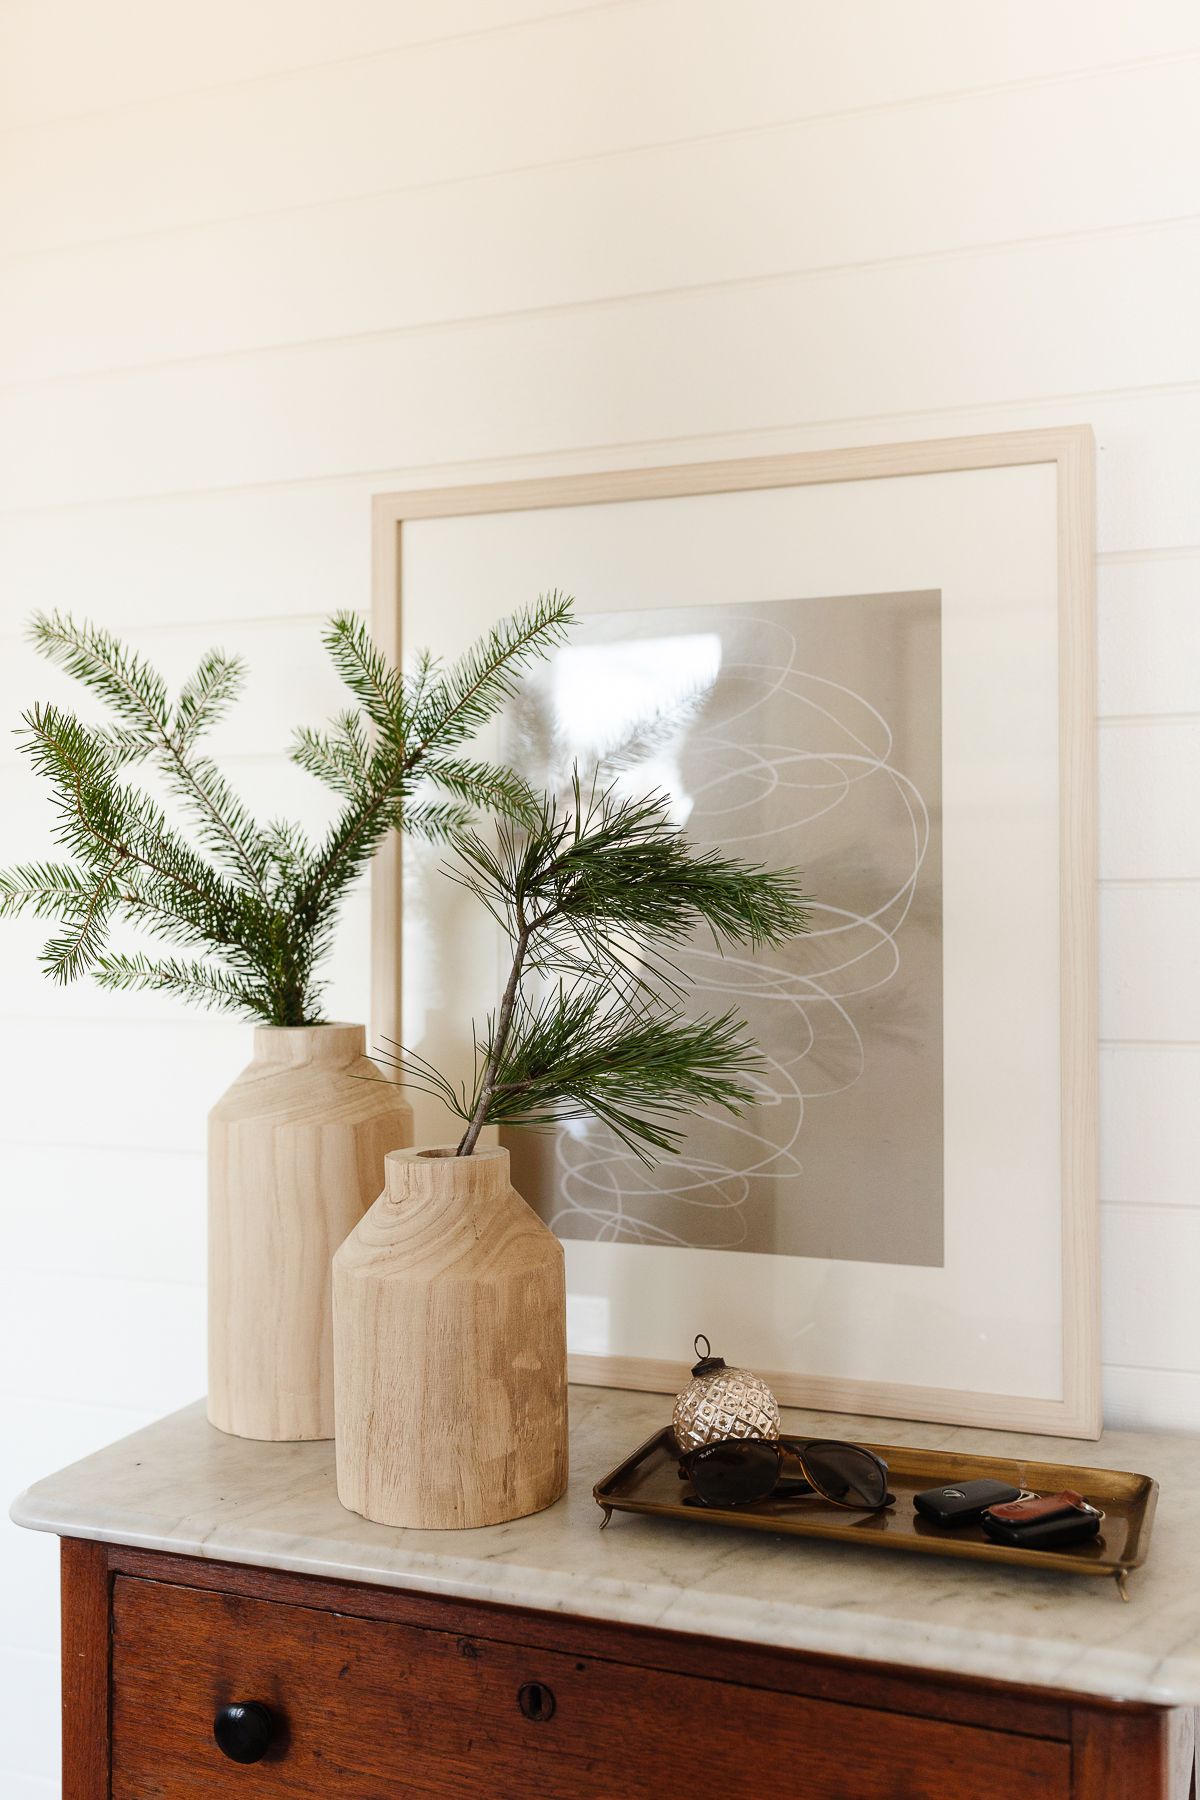 Traditional Christmas decor of evergreen branches in wooden vases